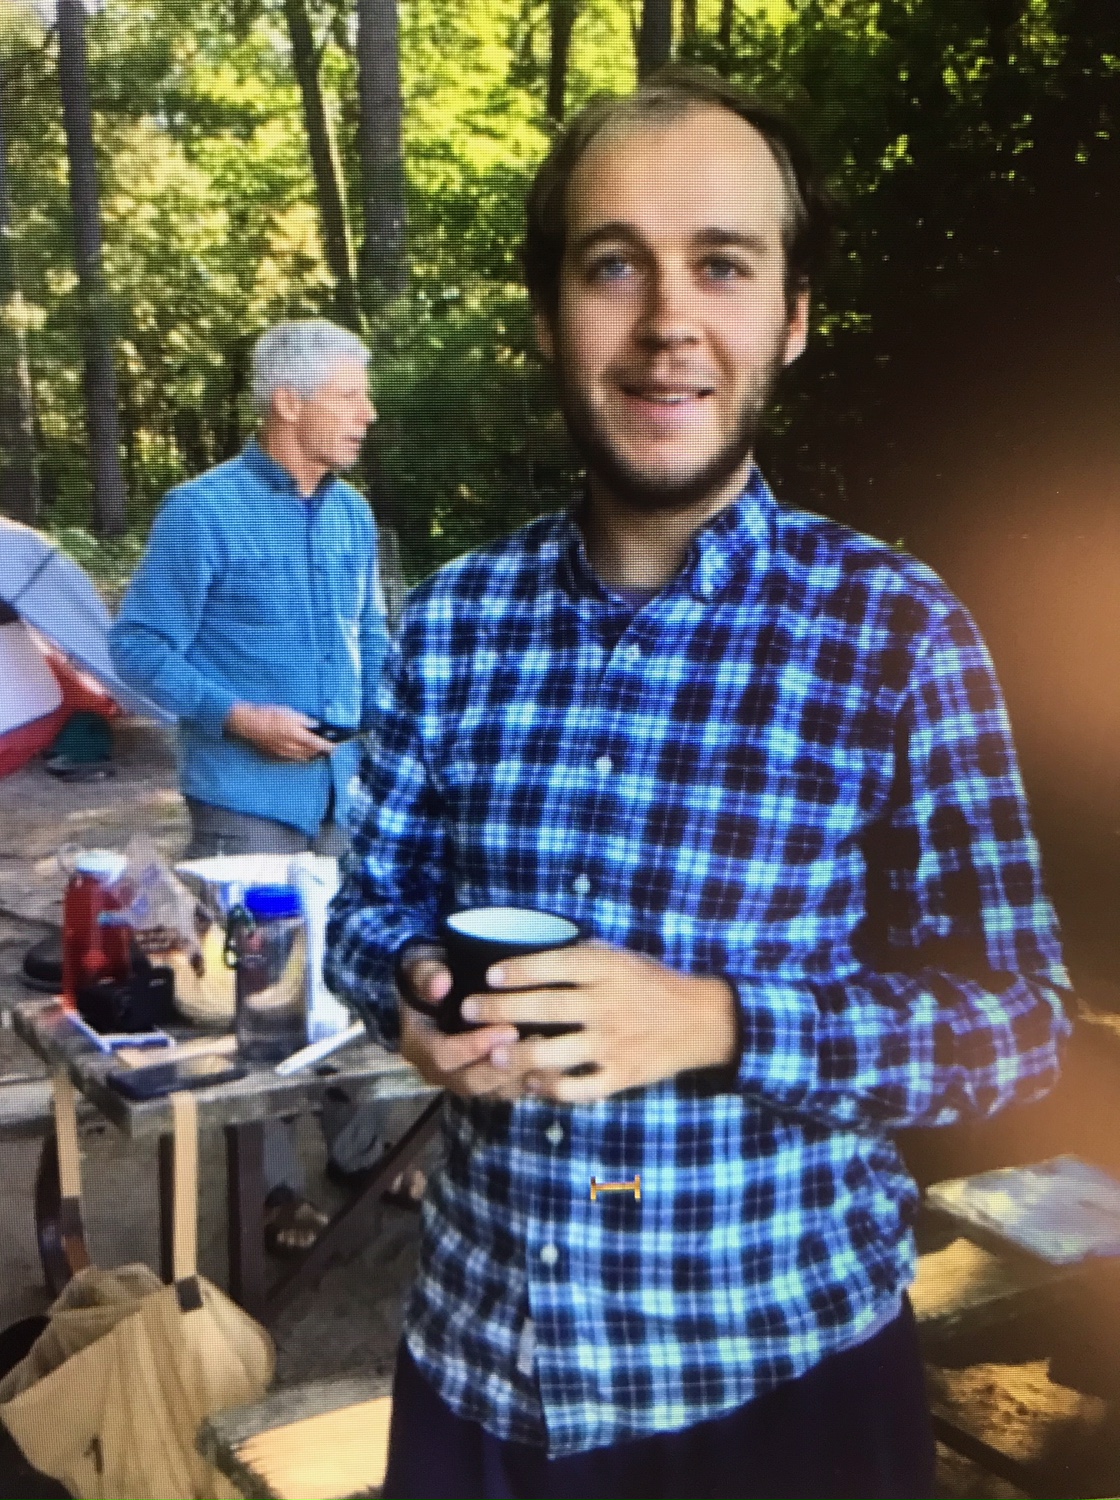 Police are seeking the public's assistance in locating 28-year-old Jesse Campbell who has been missing from the Bracebridge area since Sunday.